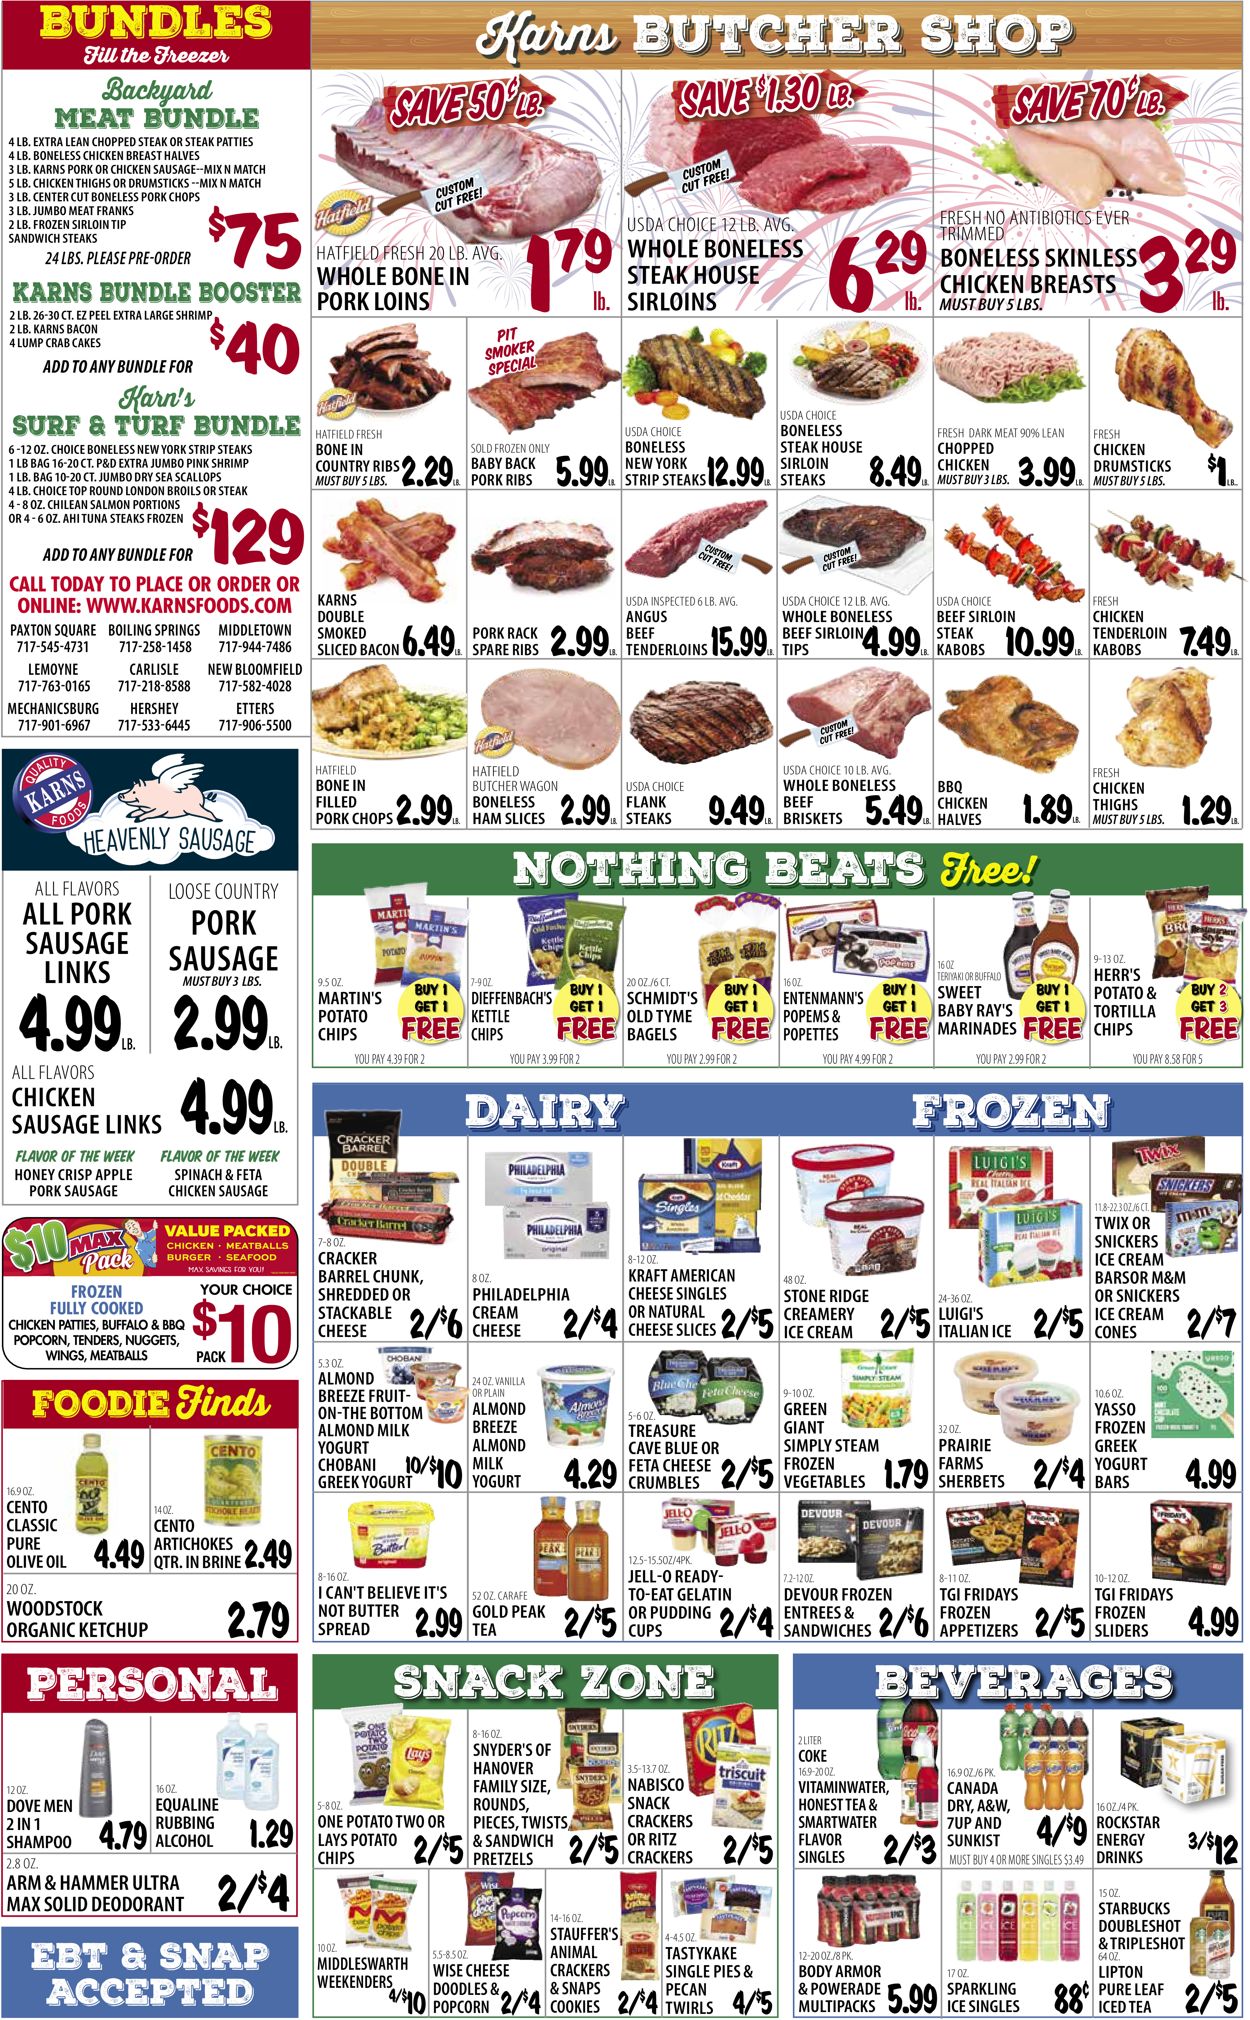 Karns Quality Foods Ad from 08/31/2021